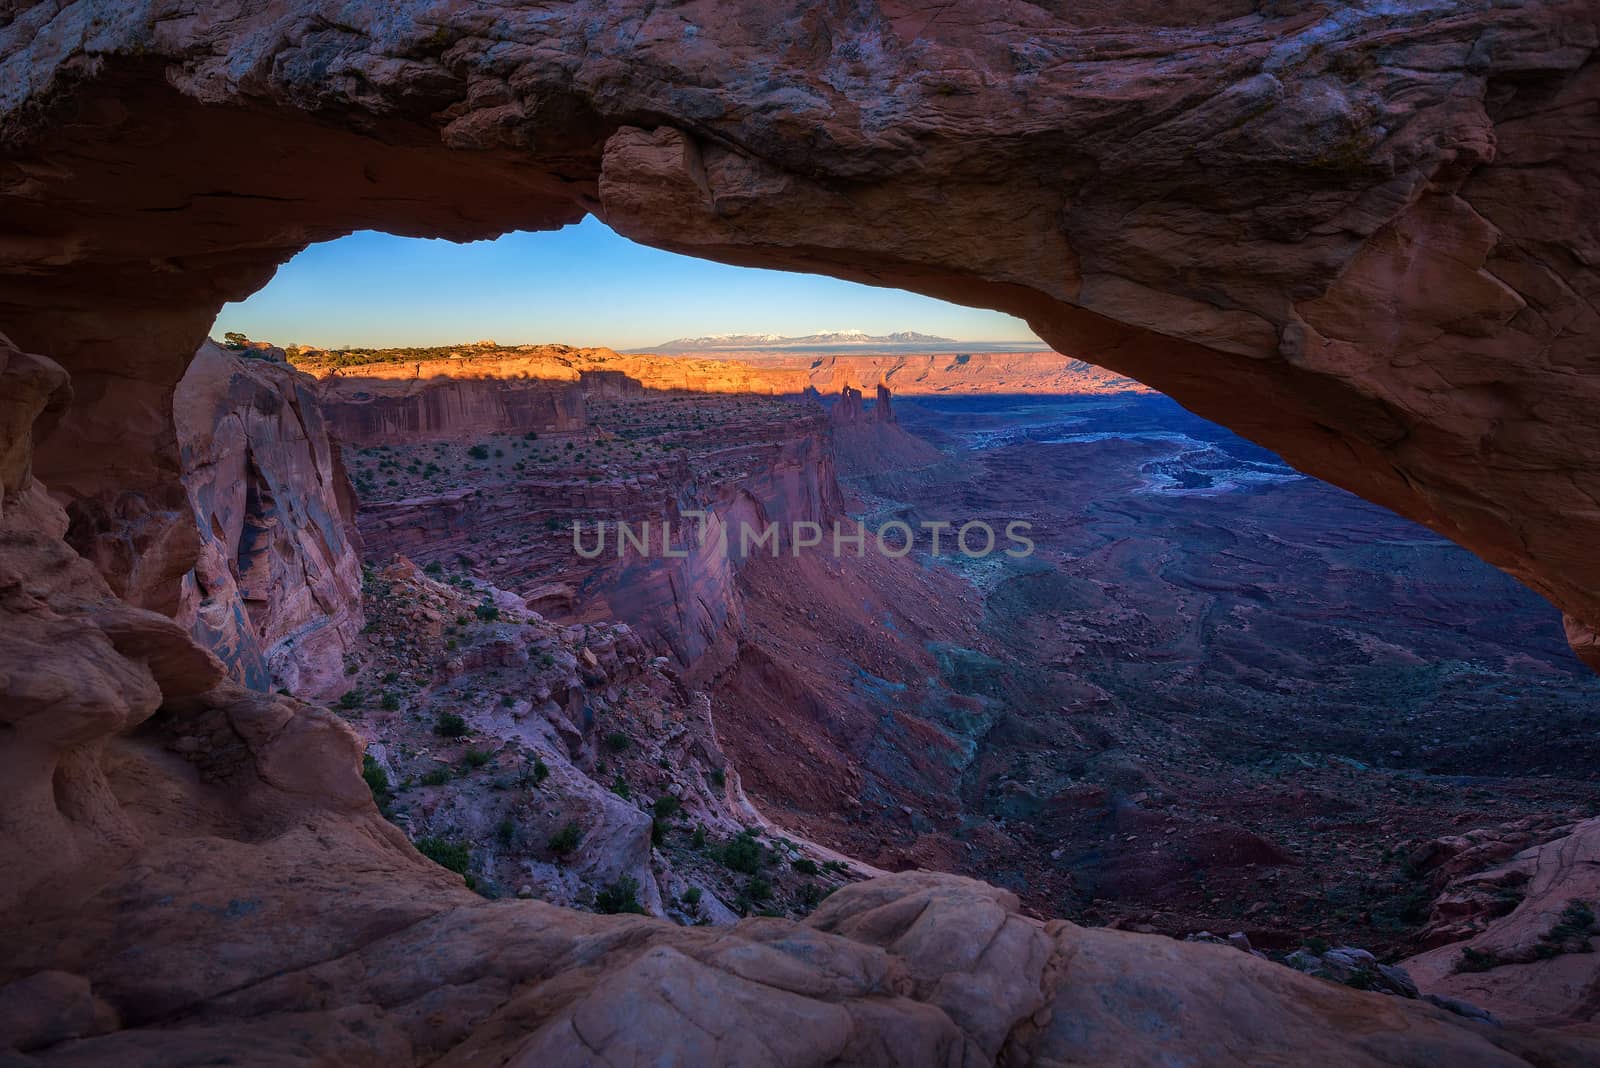 Sunset viewed through the Mesa Arch in Canyonlands National Park near Moab, Utah with snow covered Rocky Mountains in the background. Mesa Arch became a symbol of the American Southwest.